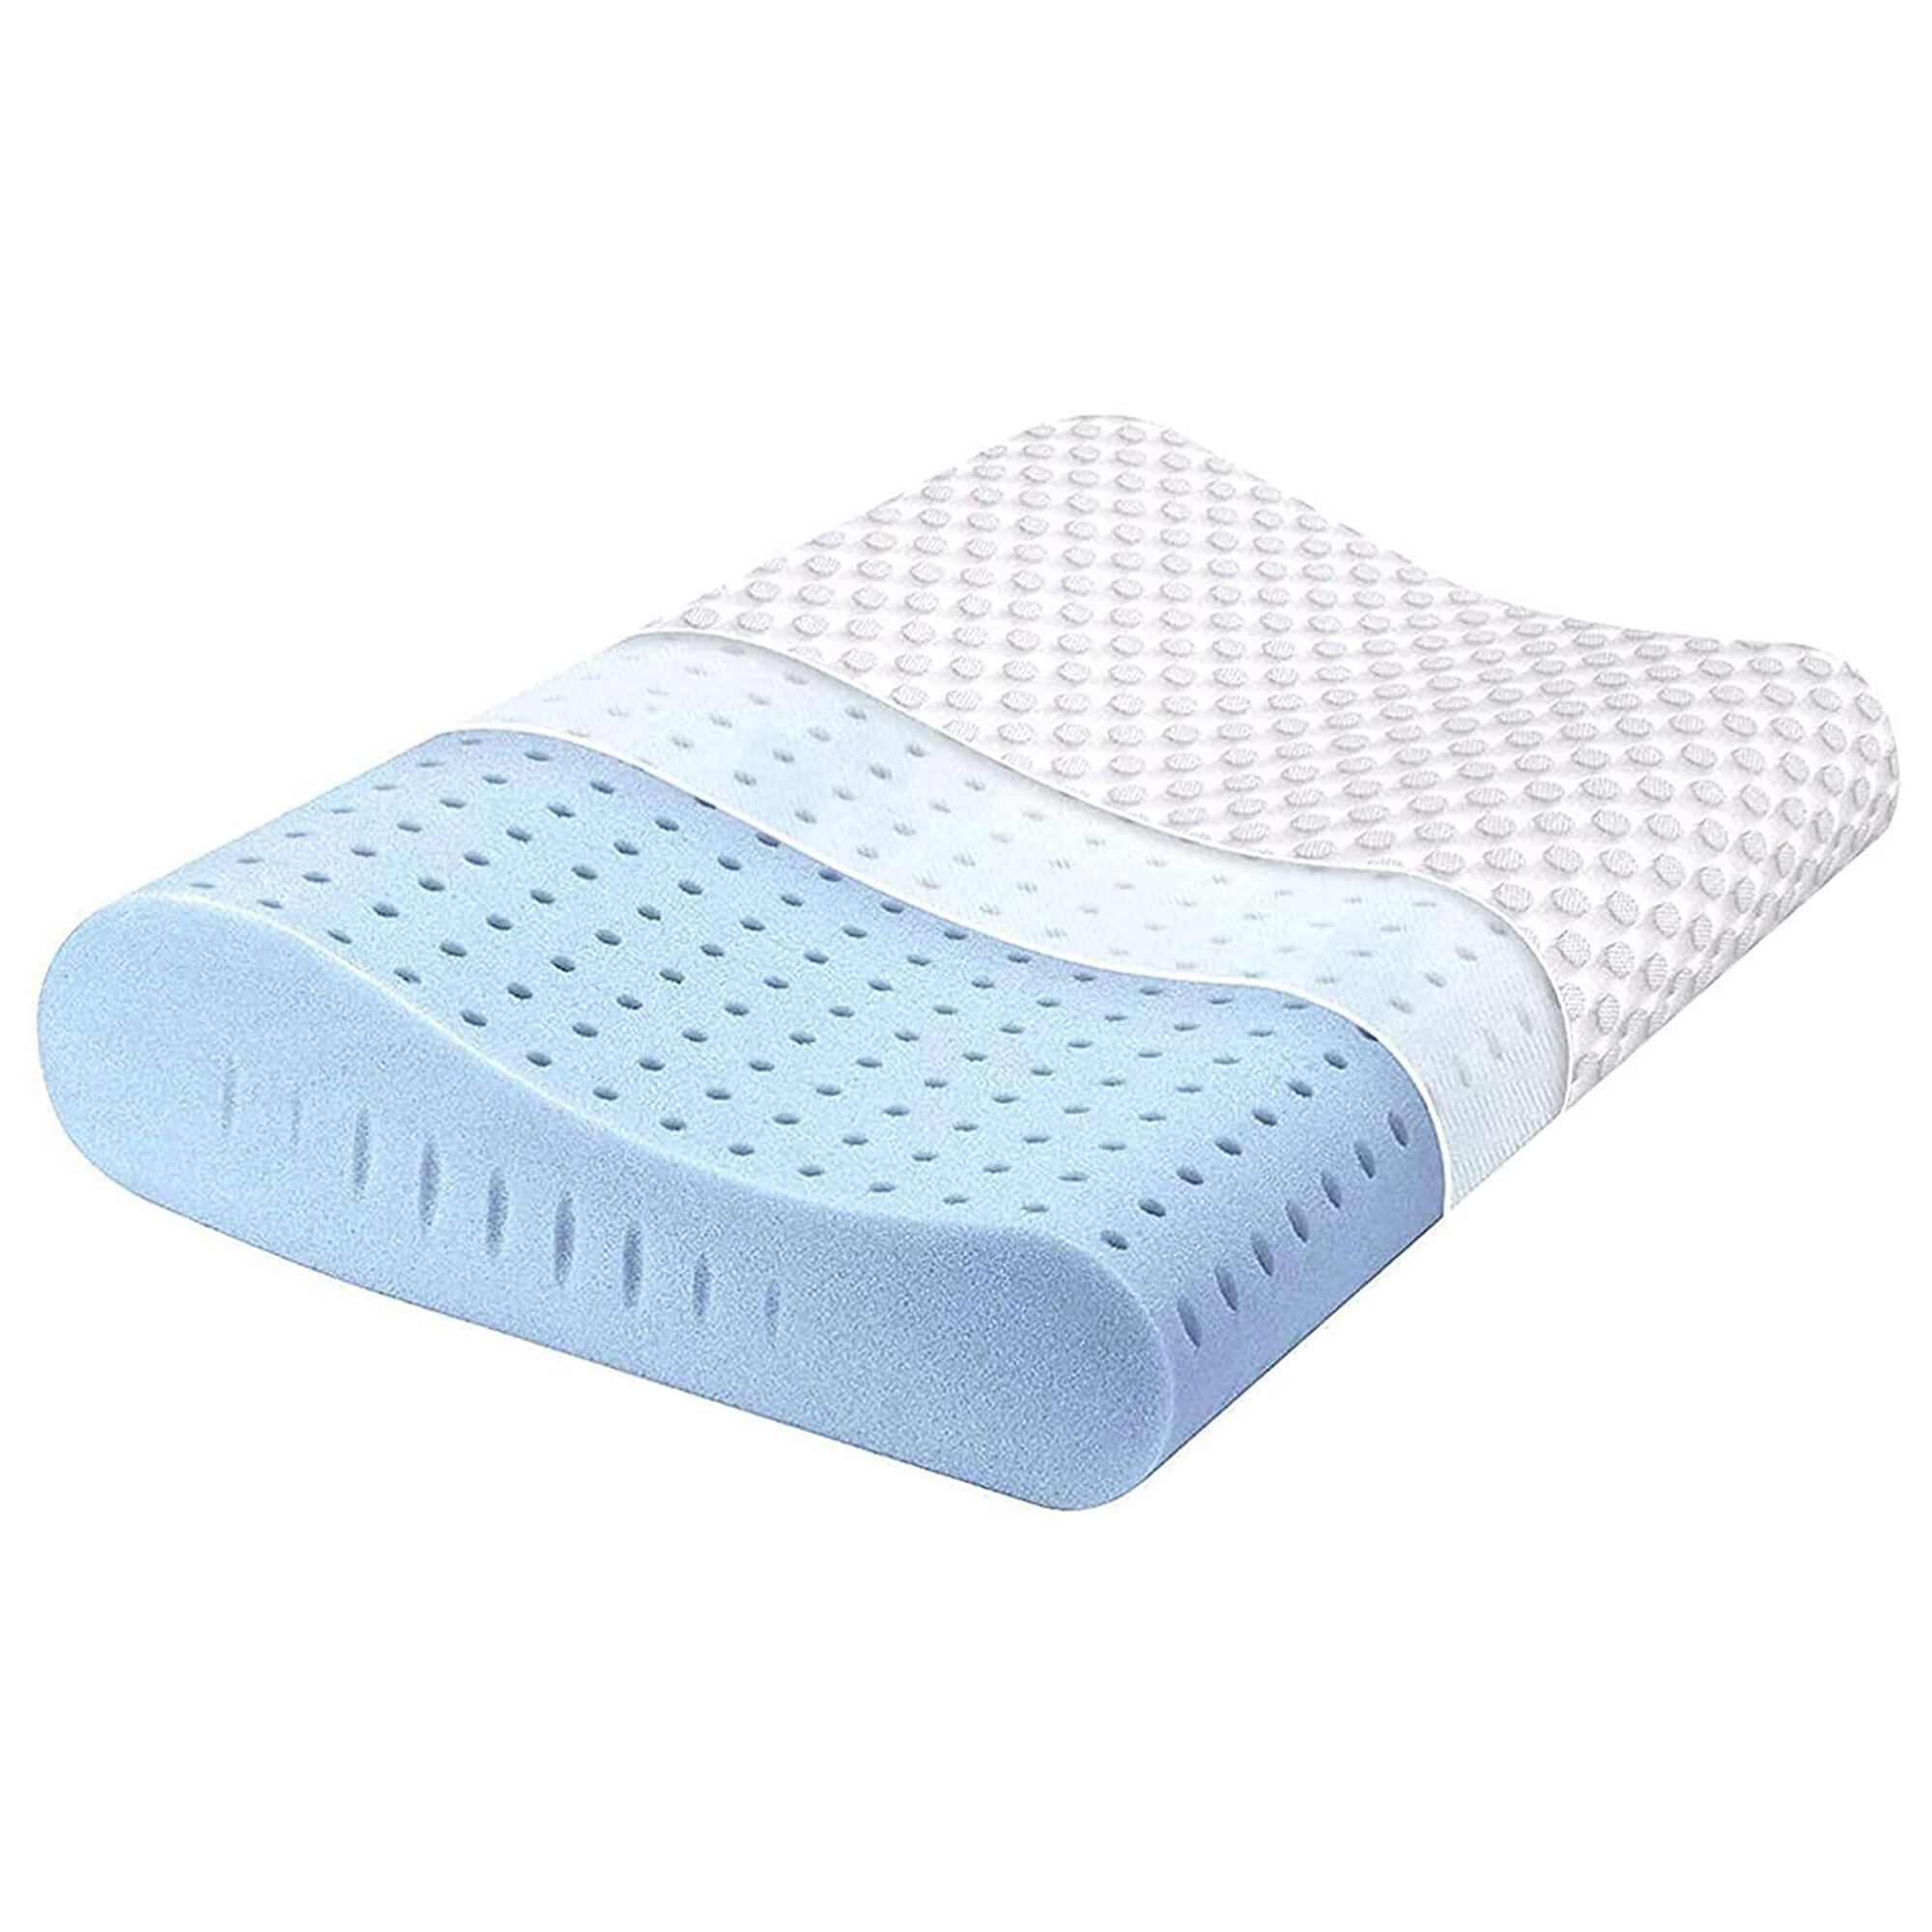 Made in the USA Standard Size Memory Foam Contour Pillow with Cotton Cover 